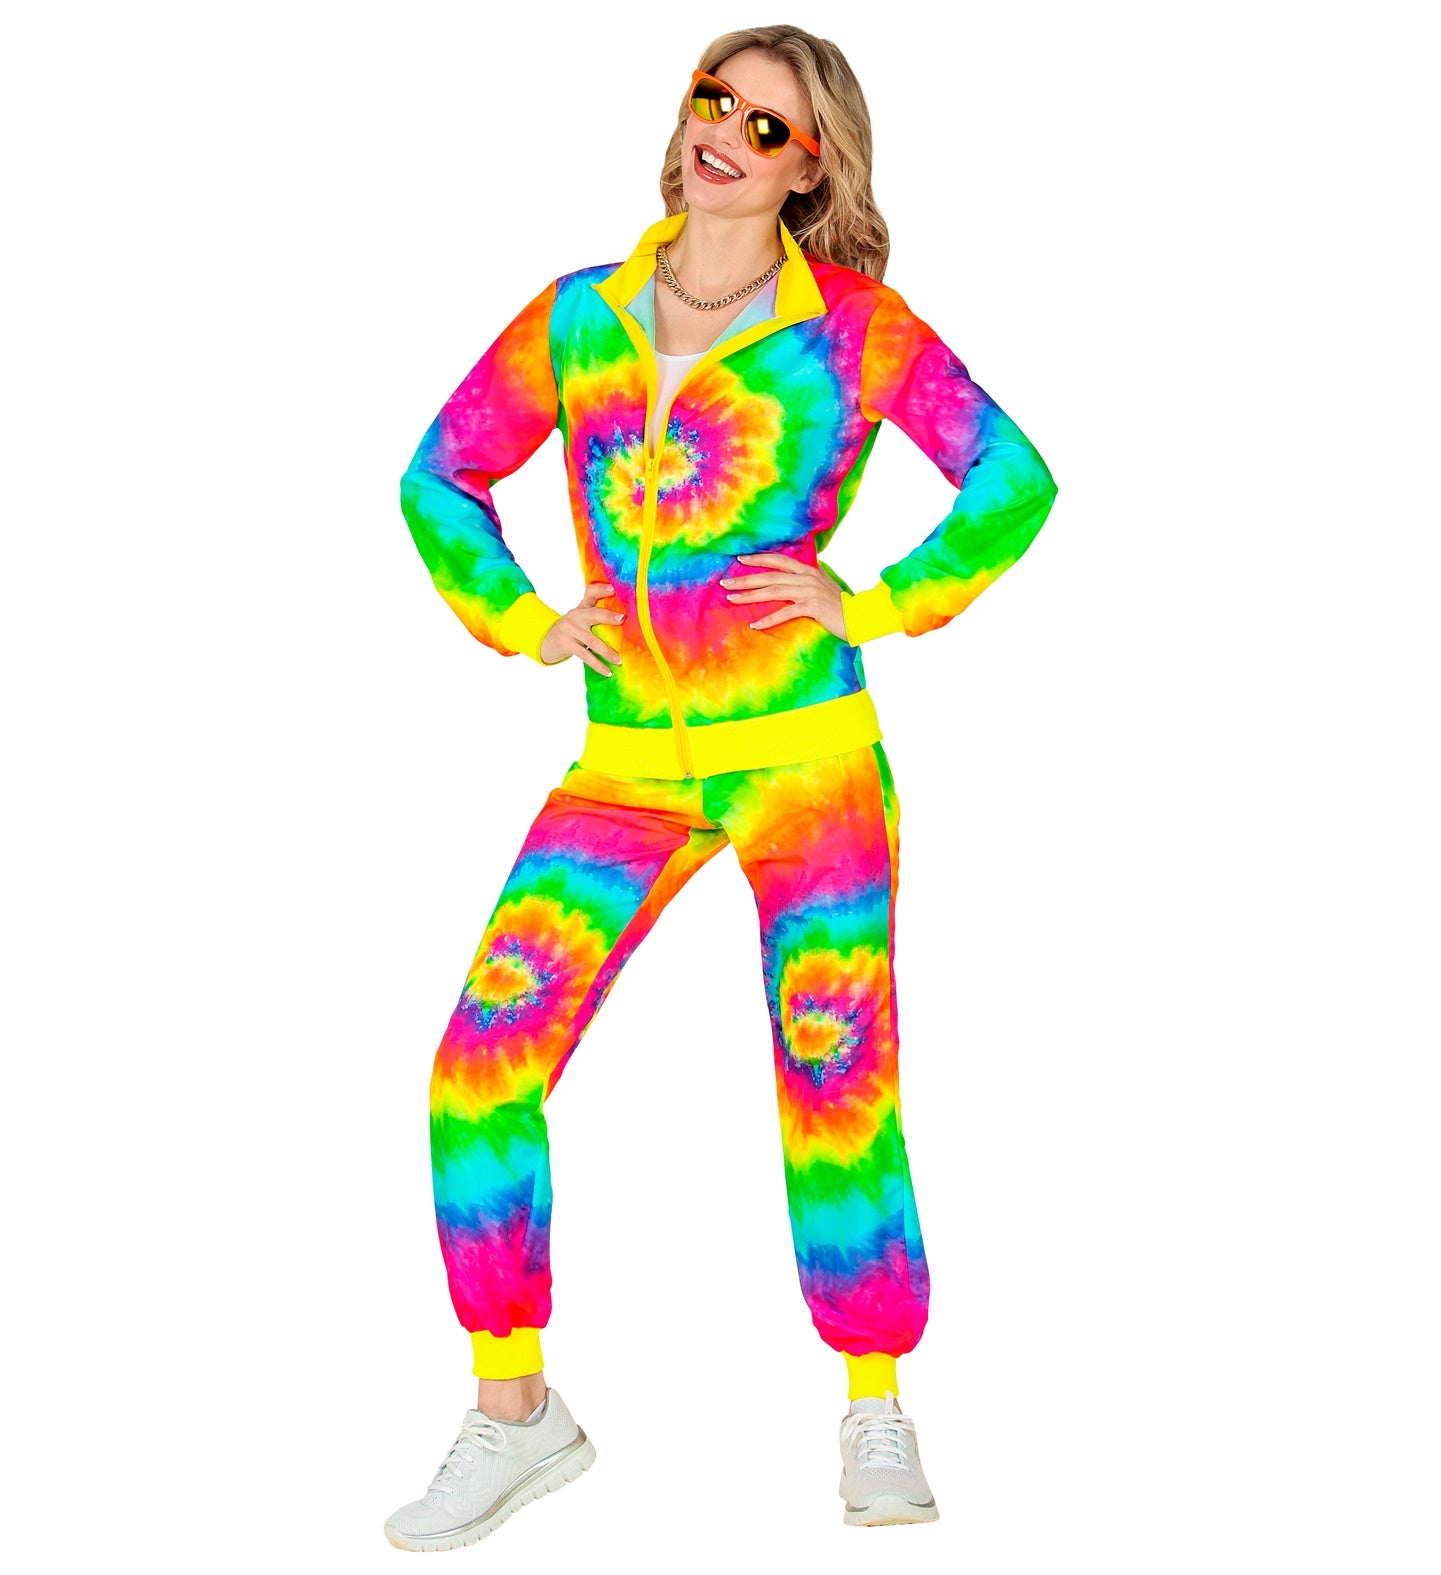 80's Neon Tie Dye Psychedelic Tracksuit costume for women